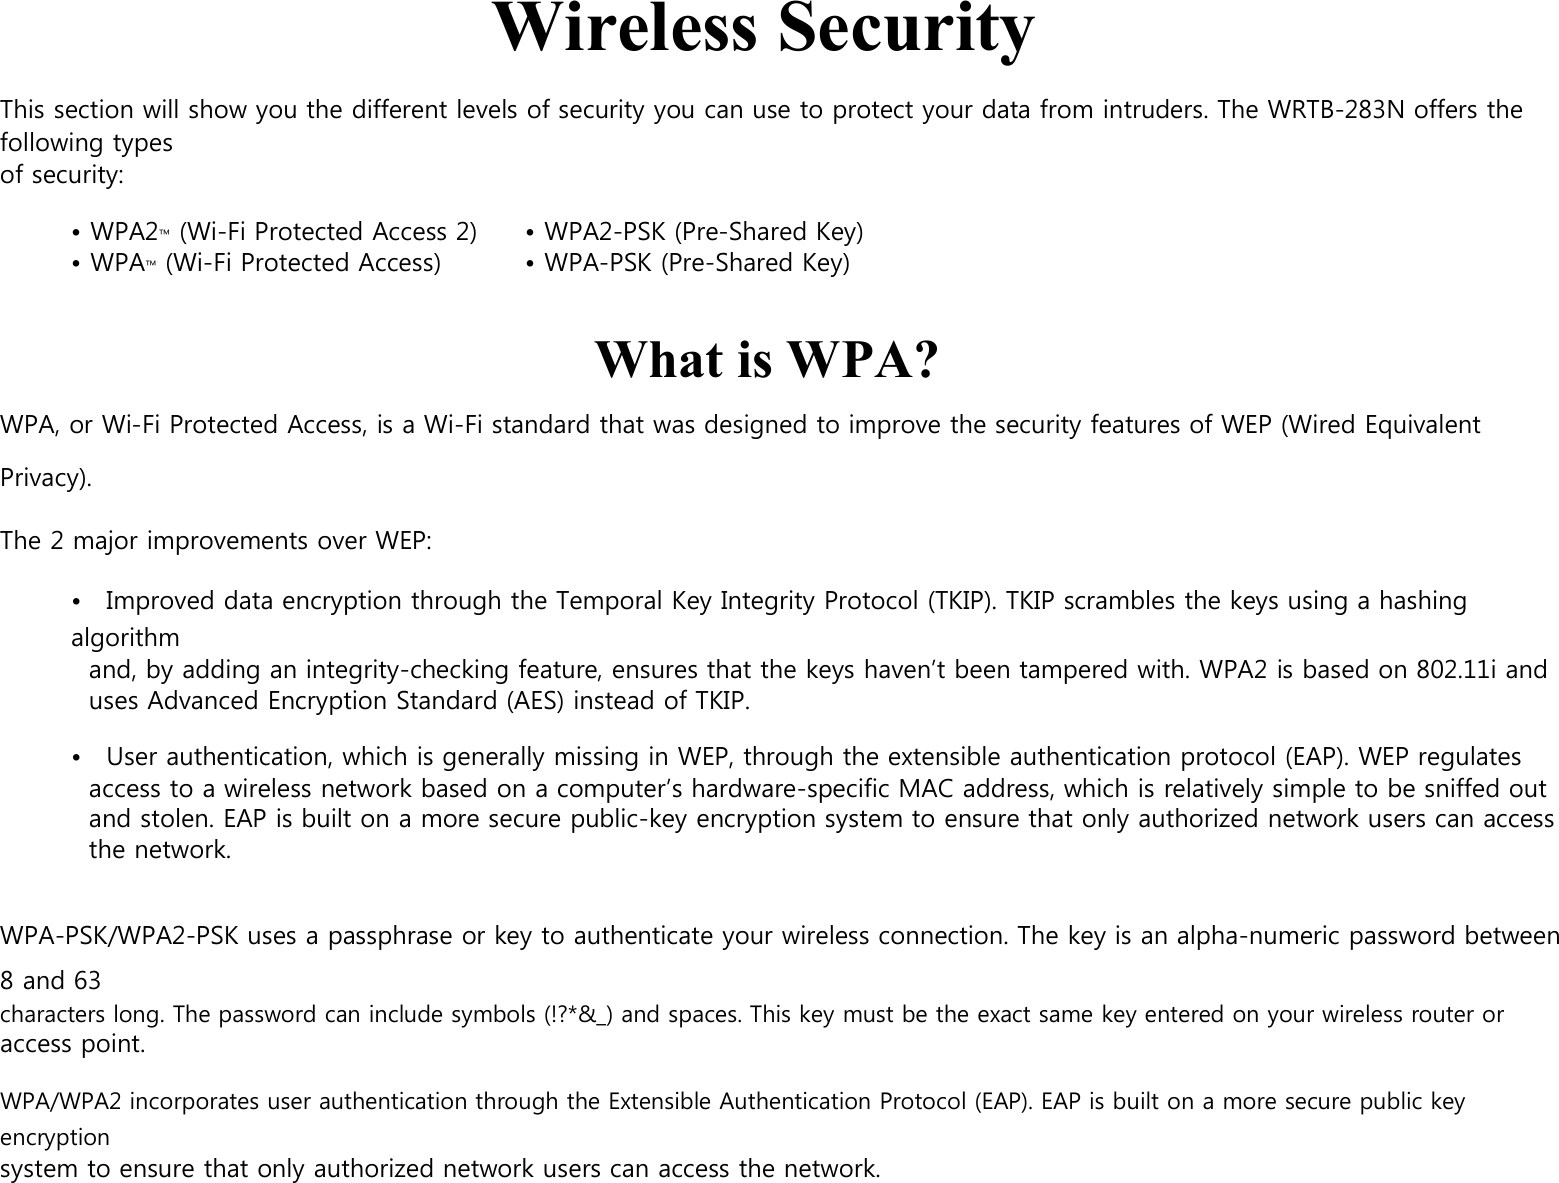    Wireless Security  This section will show you the different levels of security you can use to protect your data from intruders. The WRTB-283N offers the following types of security:  • WPA2™ (Wi-Fi Protected Access 2)         • WPA™ (Wi-Fi Protected Access)    • WPA2-PSK (Pre-Shared Key) • WPA-PSK (Pre-Shared Key)   What is WPA? WPA, or Wi-Fi Protected Access, is a Wi-Fi standard that was designed to improve the security features of WEP (Wired Equivalent Privacy).      The 2 major improvements over WEP:  •    Improved data encryption through the Temporal Key Integrity Protocol (TKIP). TKIP scrambles the keys using a hashing algorithm and, by adding an integrity-checking feature, ensures that the keys haven’t been tampered with. WPA2 is based on 802.11i and uses Advanced Encryption Standard (AES) instead of TKIP.  •    User authentication, which is generally missing in WEP, through the extensible authentication protocol (EAP). WEP regulates access to a wireless network based on a computer’s hardware-specific MAC address, which is relatively simple to be sniffed out and stolen. EAP is built on a more secure public-key encryption system to ensure that only authorized network users can access the network.   WPA-PSK/WPA2-PSK uses a passphrase or key to authenticate your wireless connection. The key is an alpha-numeric password between 8 and 63 characters long. The password can include symbols (!?*&amp;_) and spaces. This key must be the exact same key entered on your wireless router or access point.  WPA/WPA2 incorporates user authentication through the Extensible Authentication Protocol (EAP). EAP is built on a more secure public key encryption system to ensure that only authorized network users can access the network.    